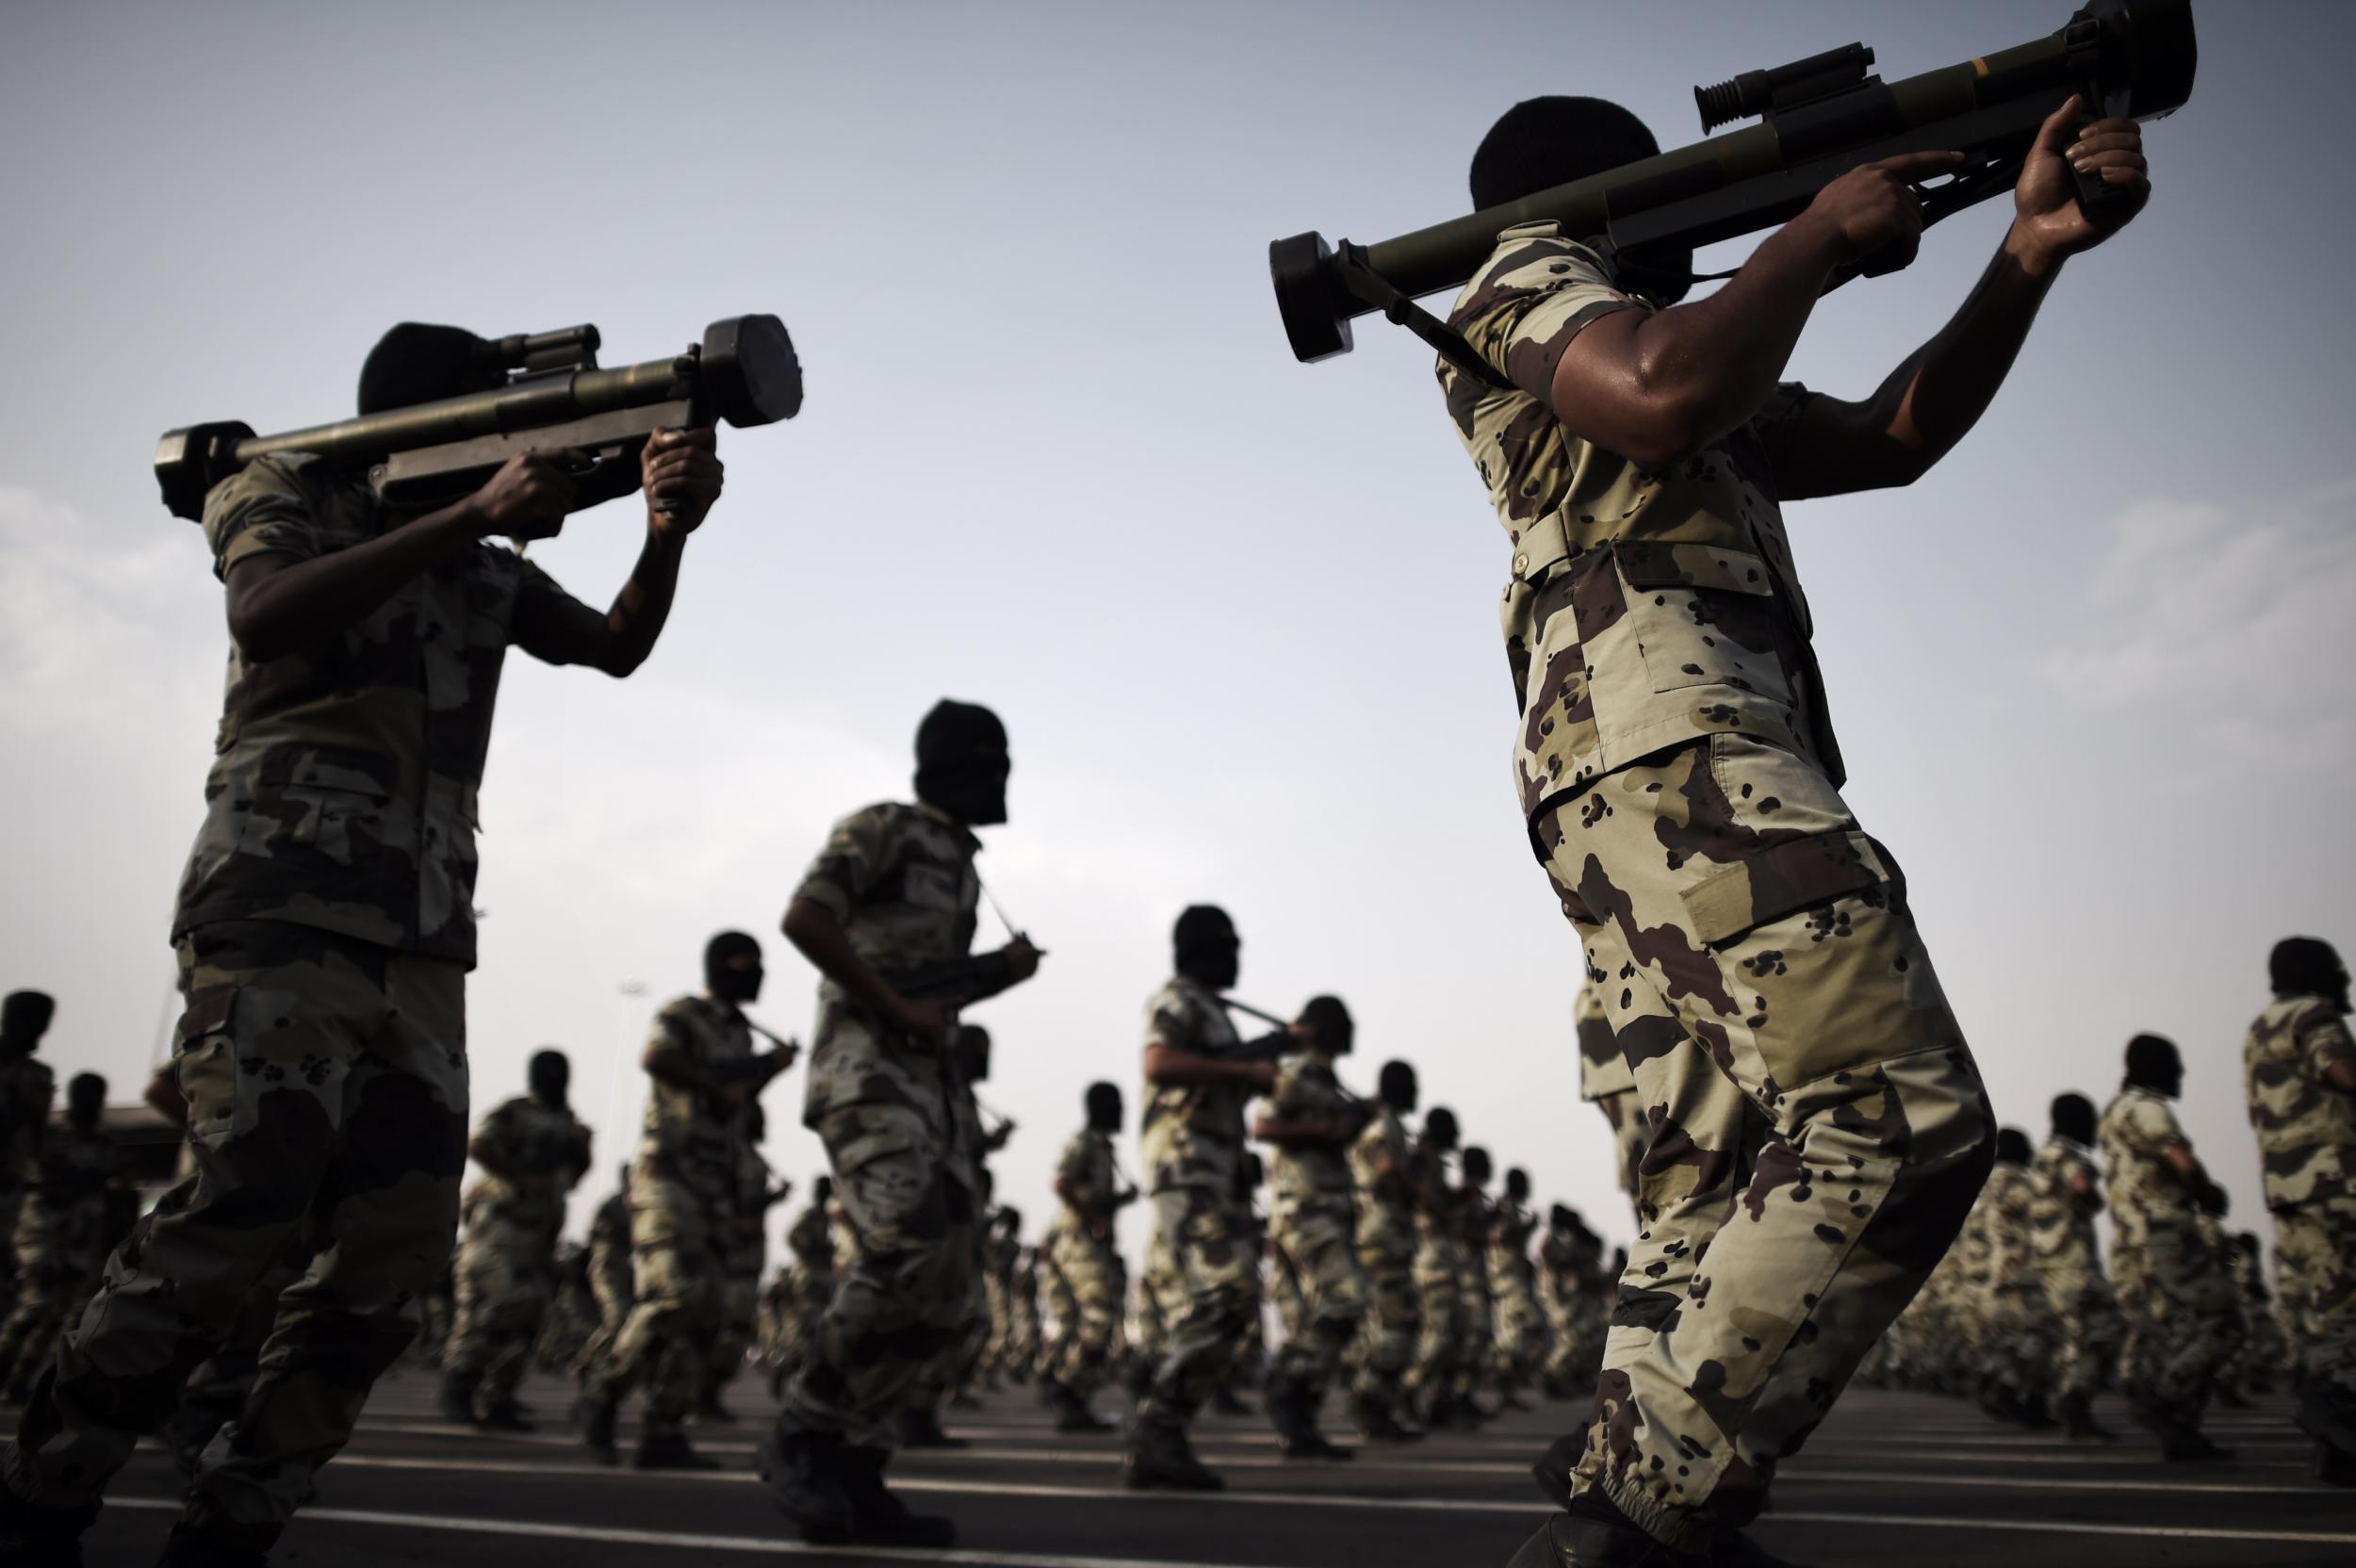 Saudi Arabian special forces on parade with heavy weapons